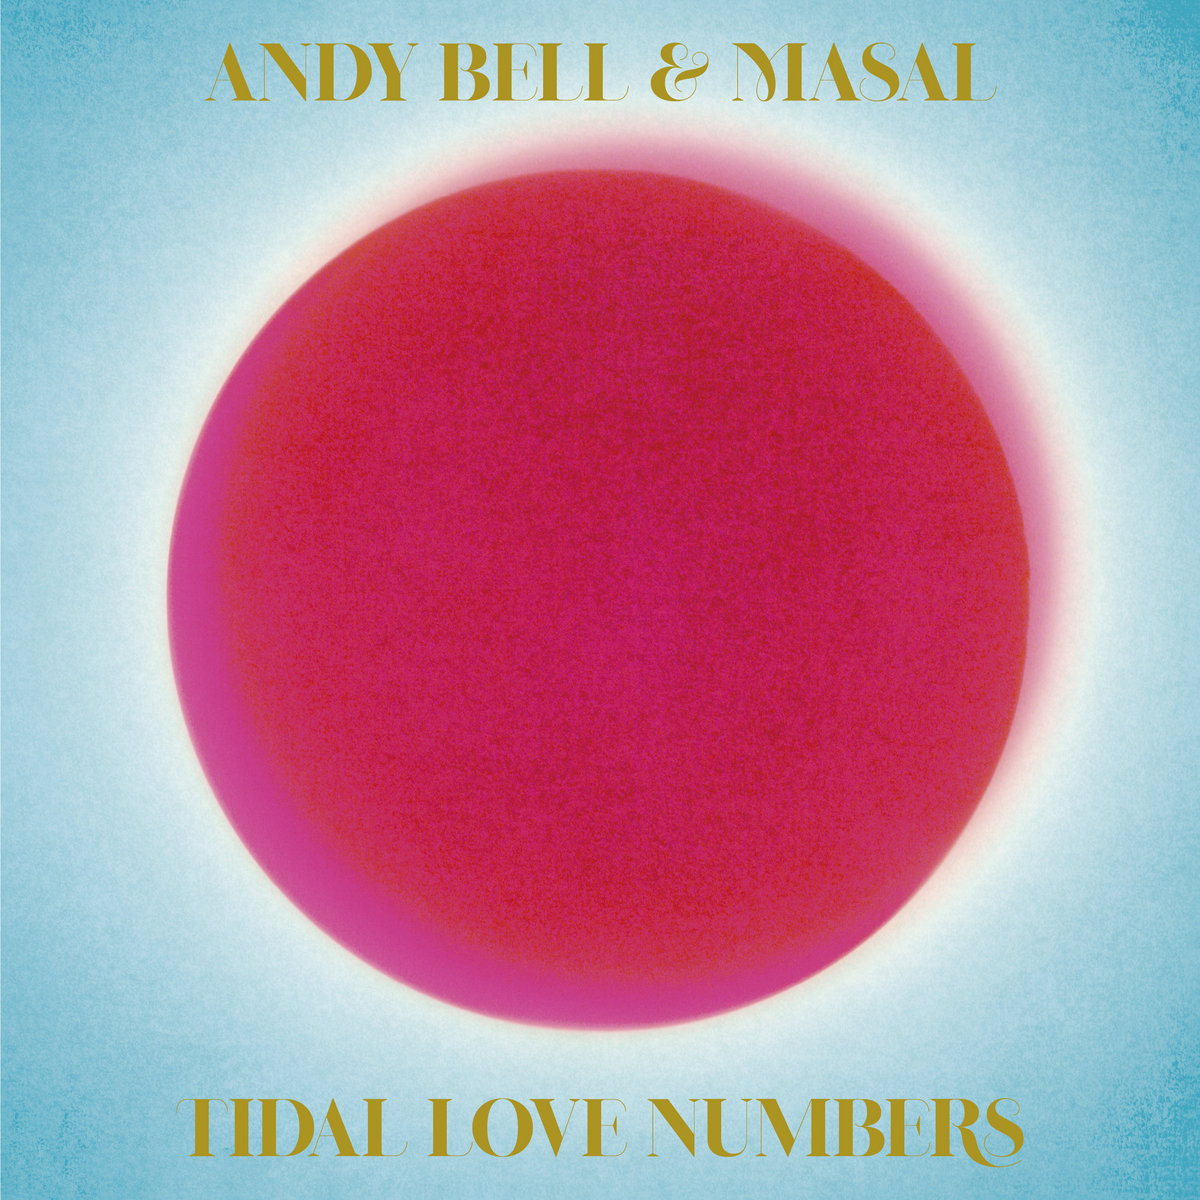 News – Andy Bell & Masal – Tidal Love Numbers